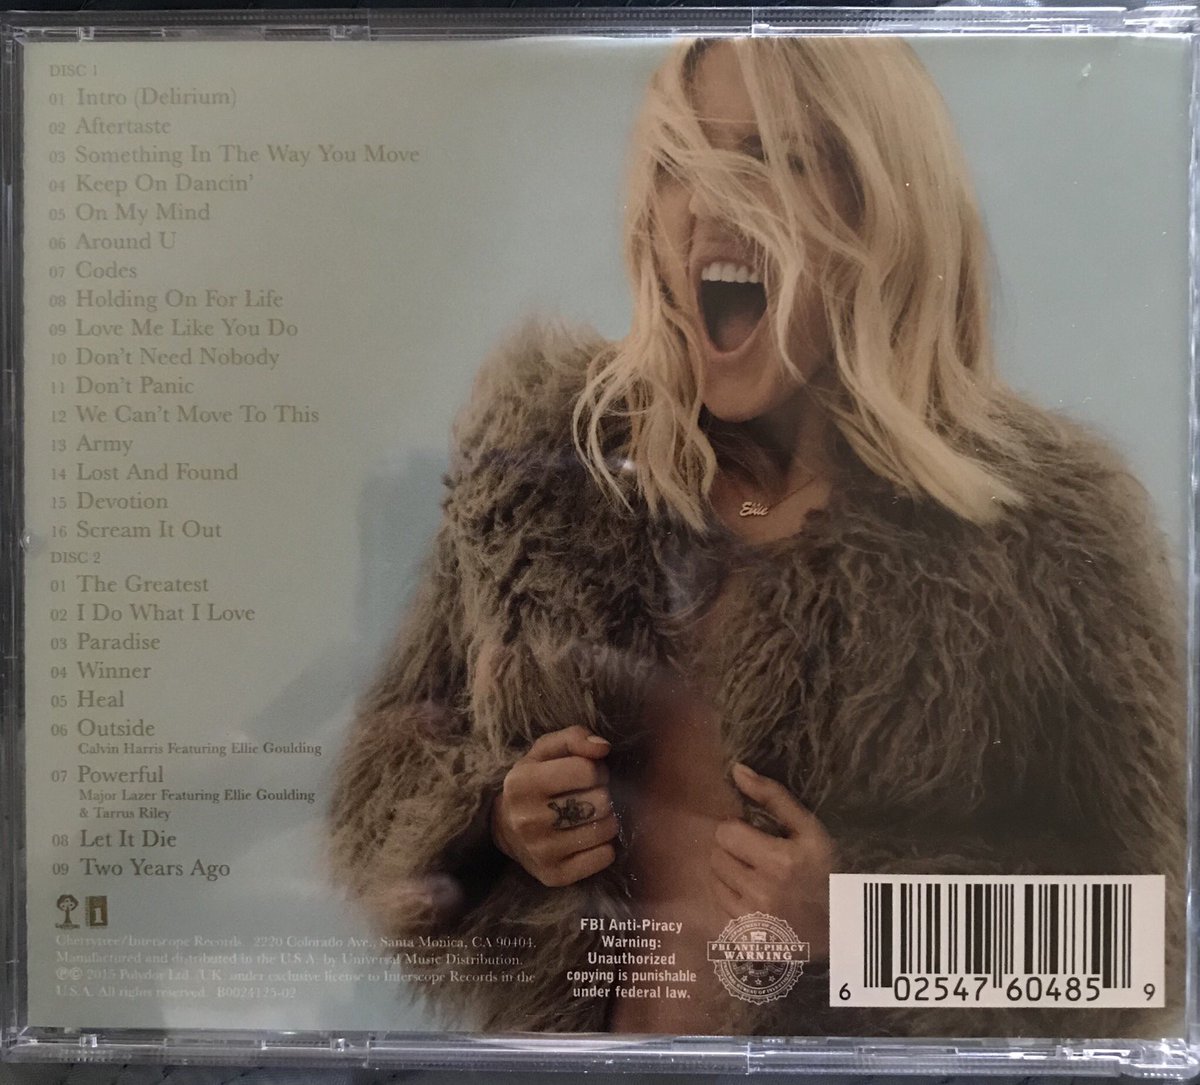 #2: Delirium by Ellie Goulding. I remember getting this album as a gift as well. This one was a surprise but I love this album so much because I really like Ellie Goulding’s voice 